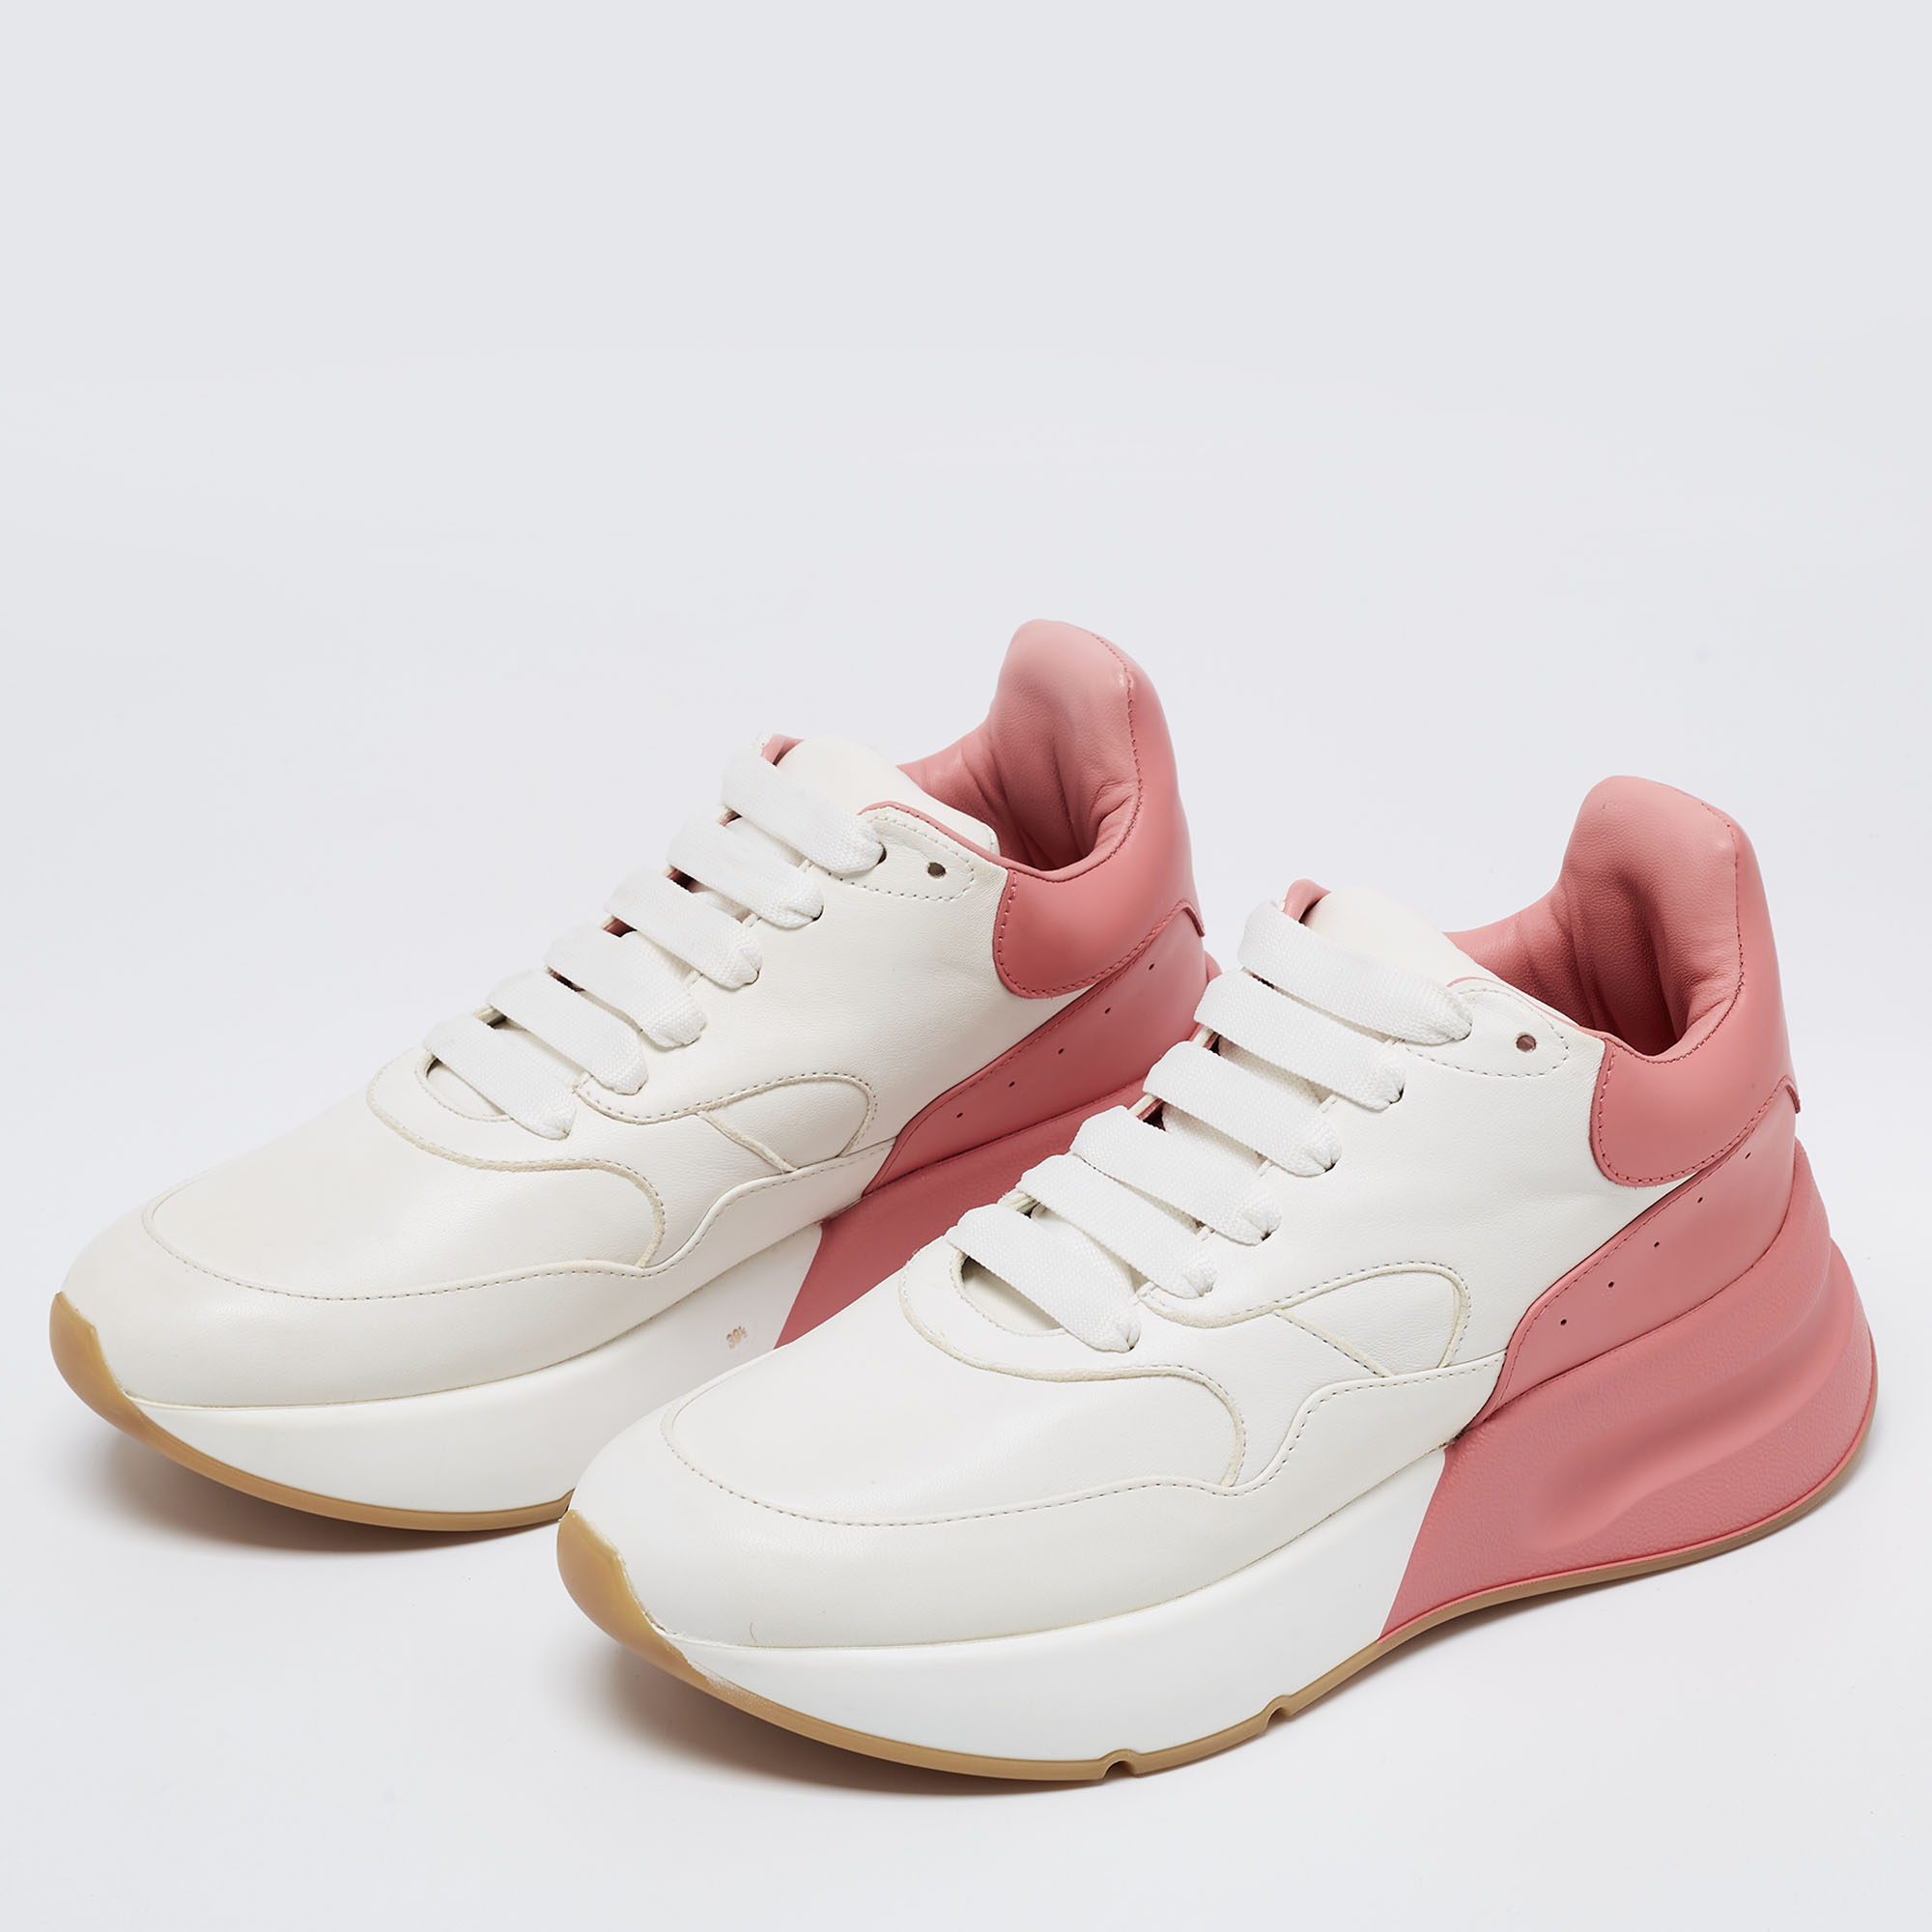 

Alexander McQueen White/Pink Leather Oversized Runner Low Top Sneakers Size